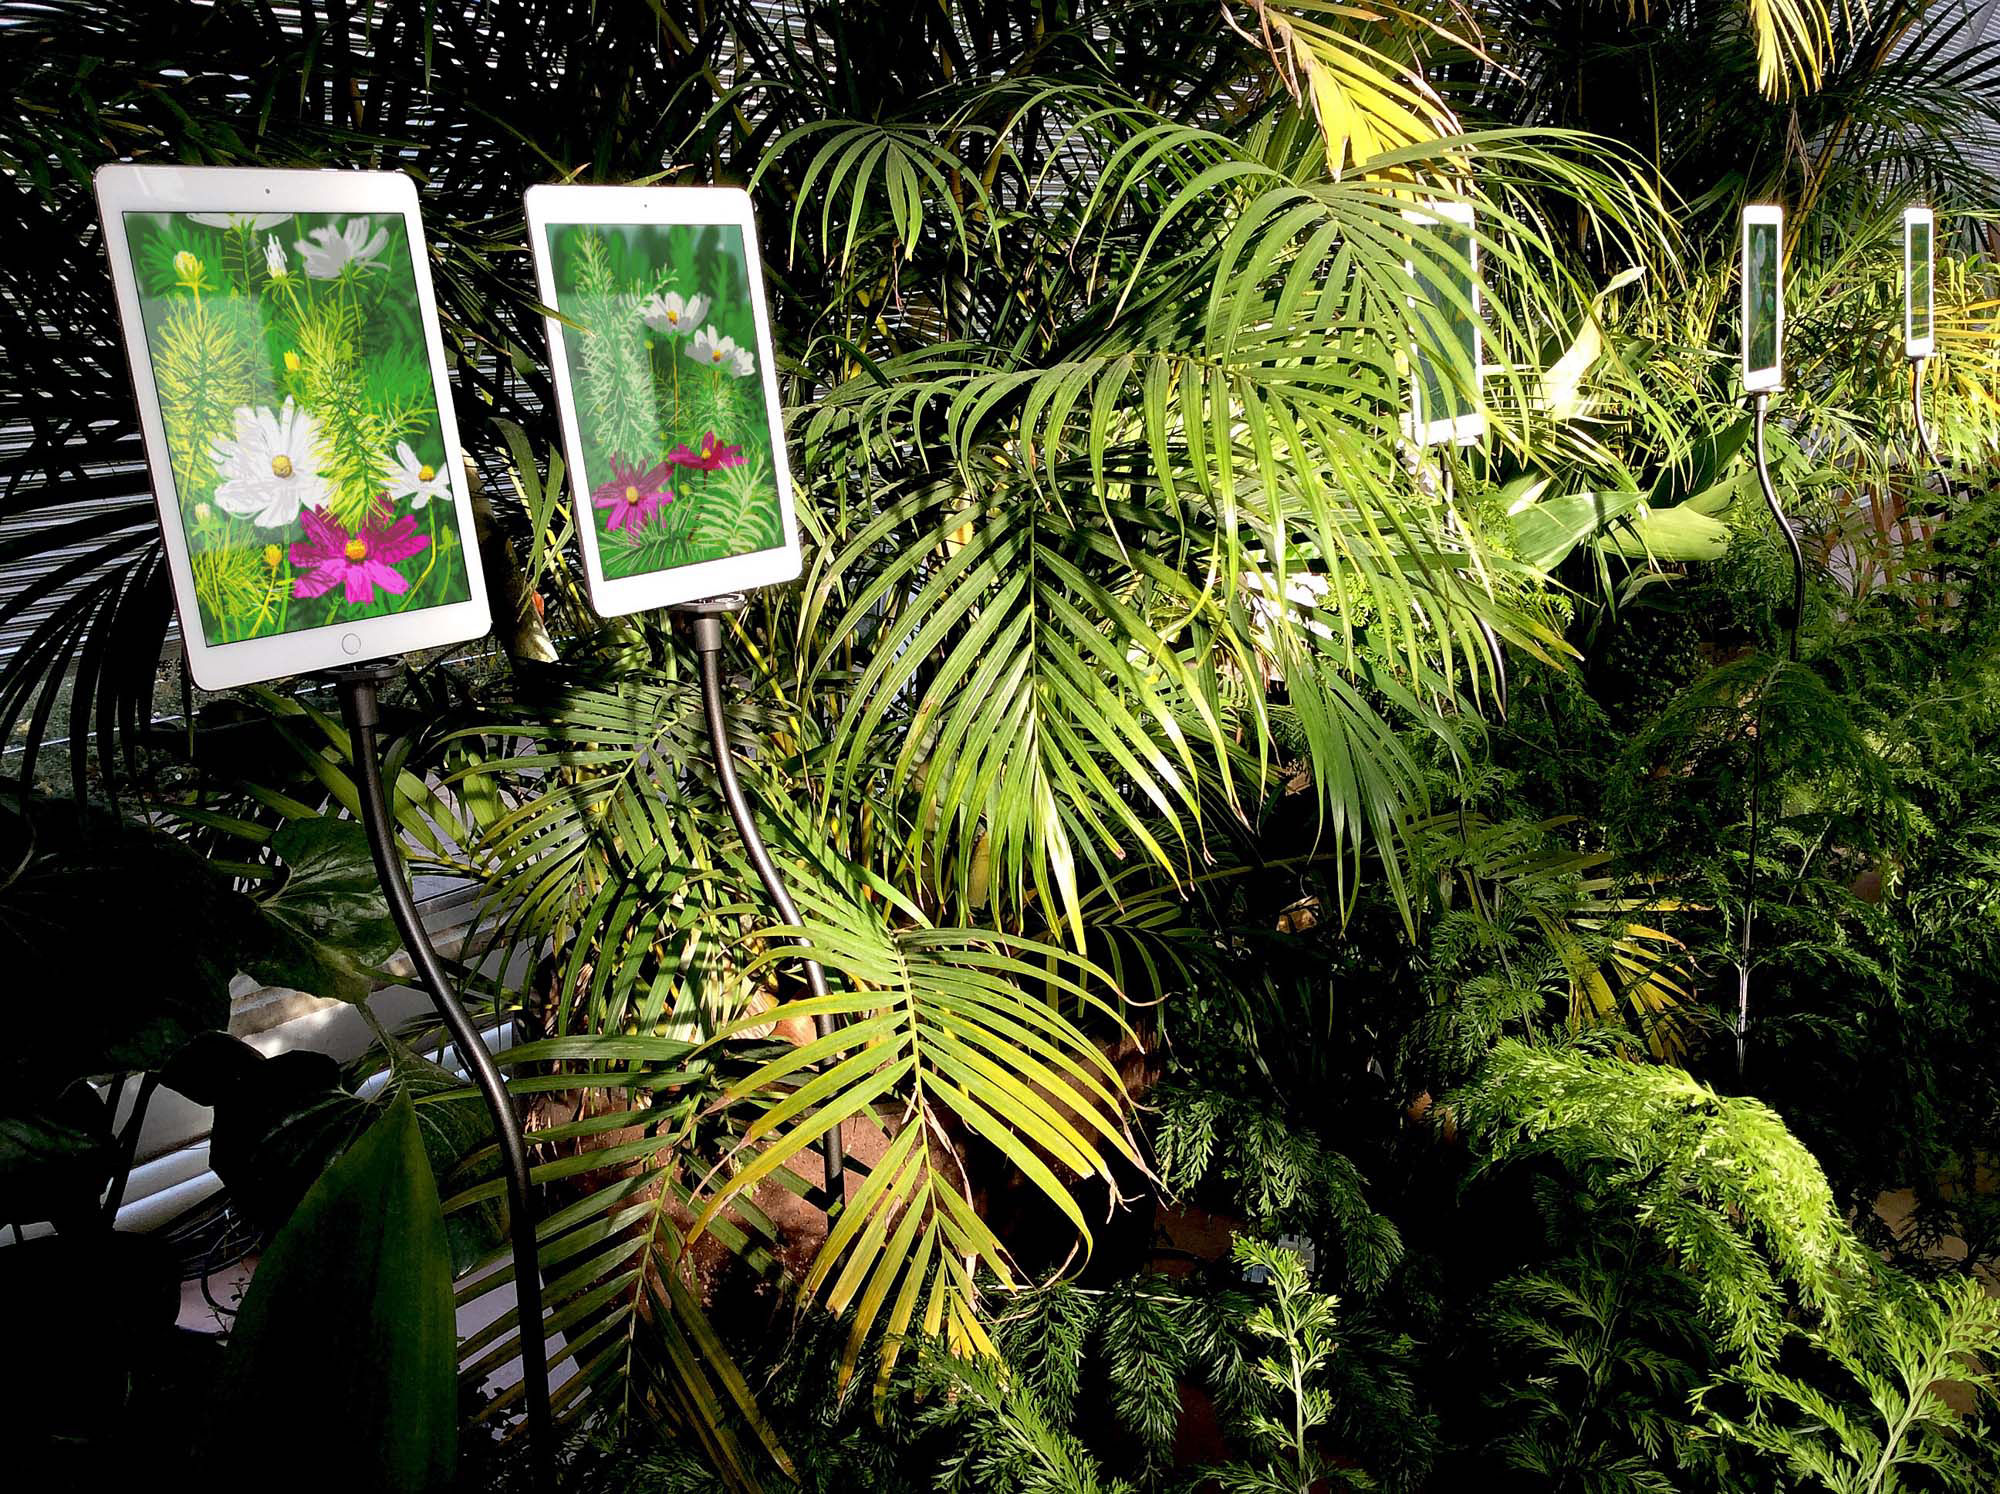 NEW 'The Digital Garden® 2019, animated iPad drawings, The Royal Horticultural Society', Andy Maitland, iPad artist